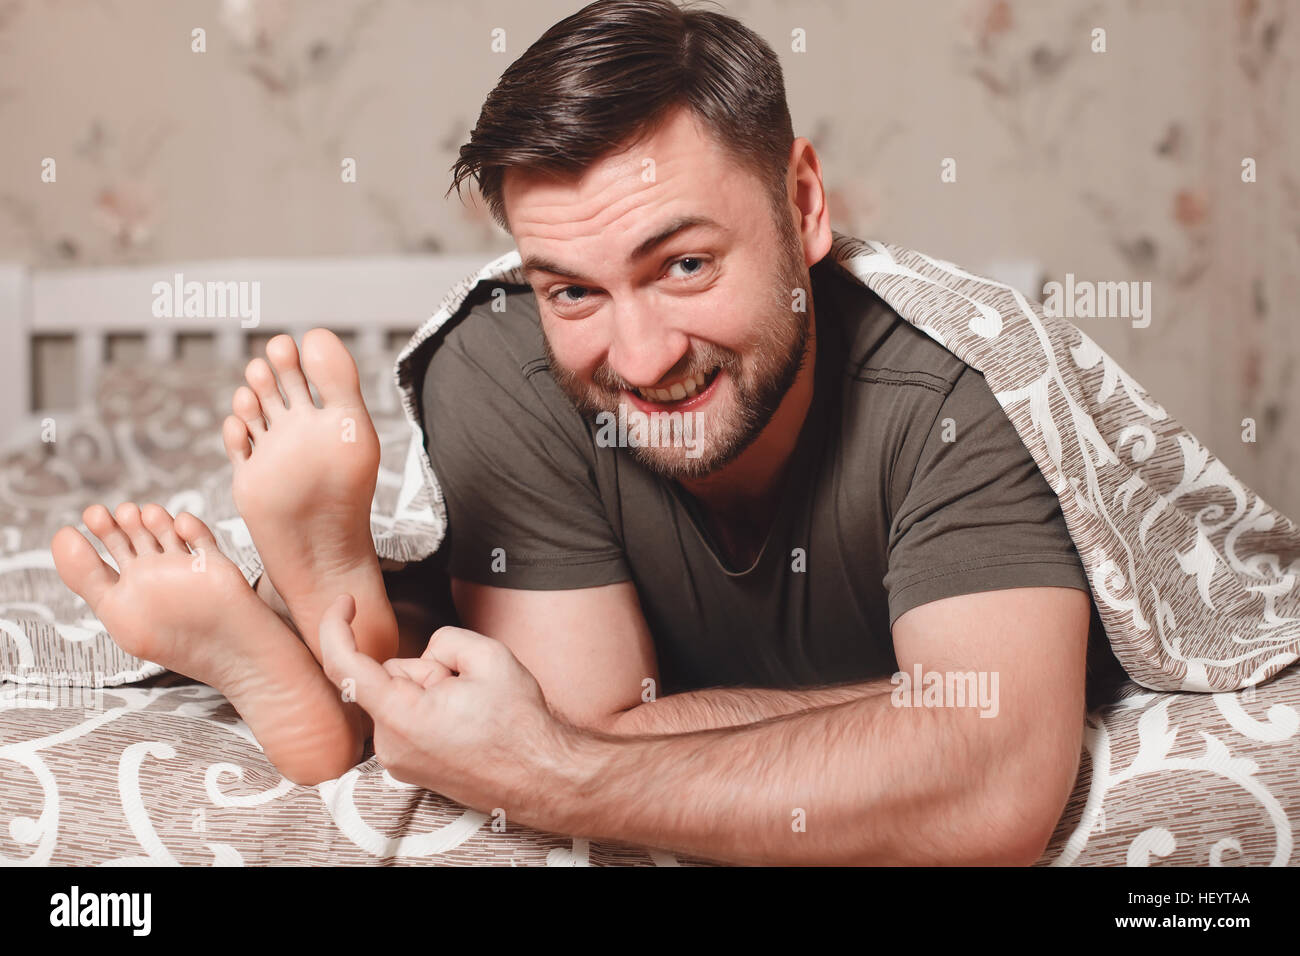 Playful man tickle woman's feet in bed. Stock Photo